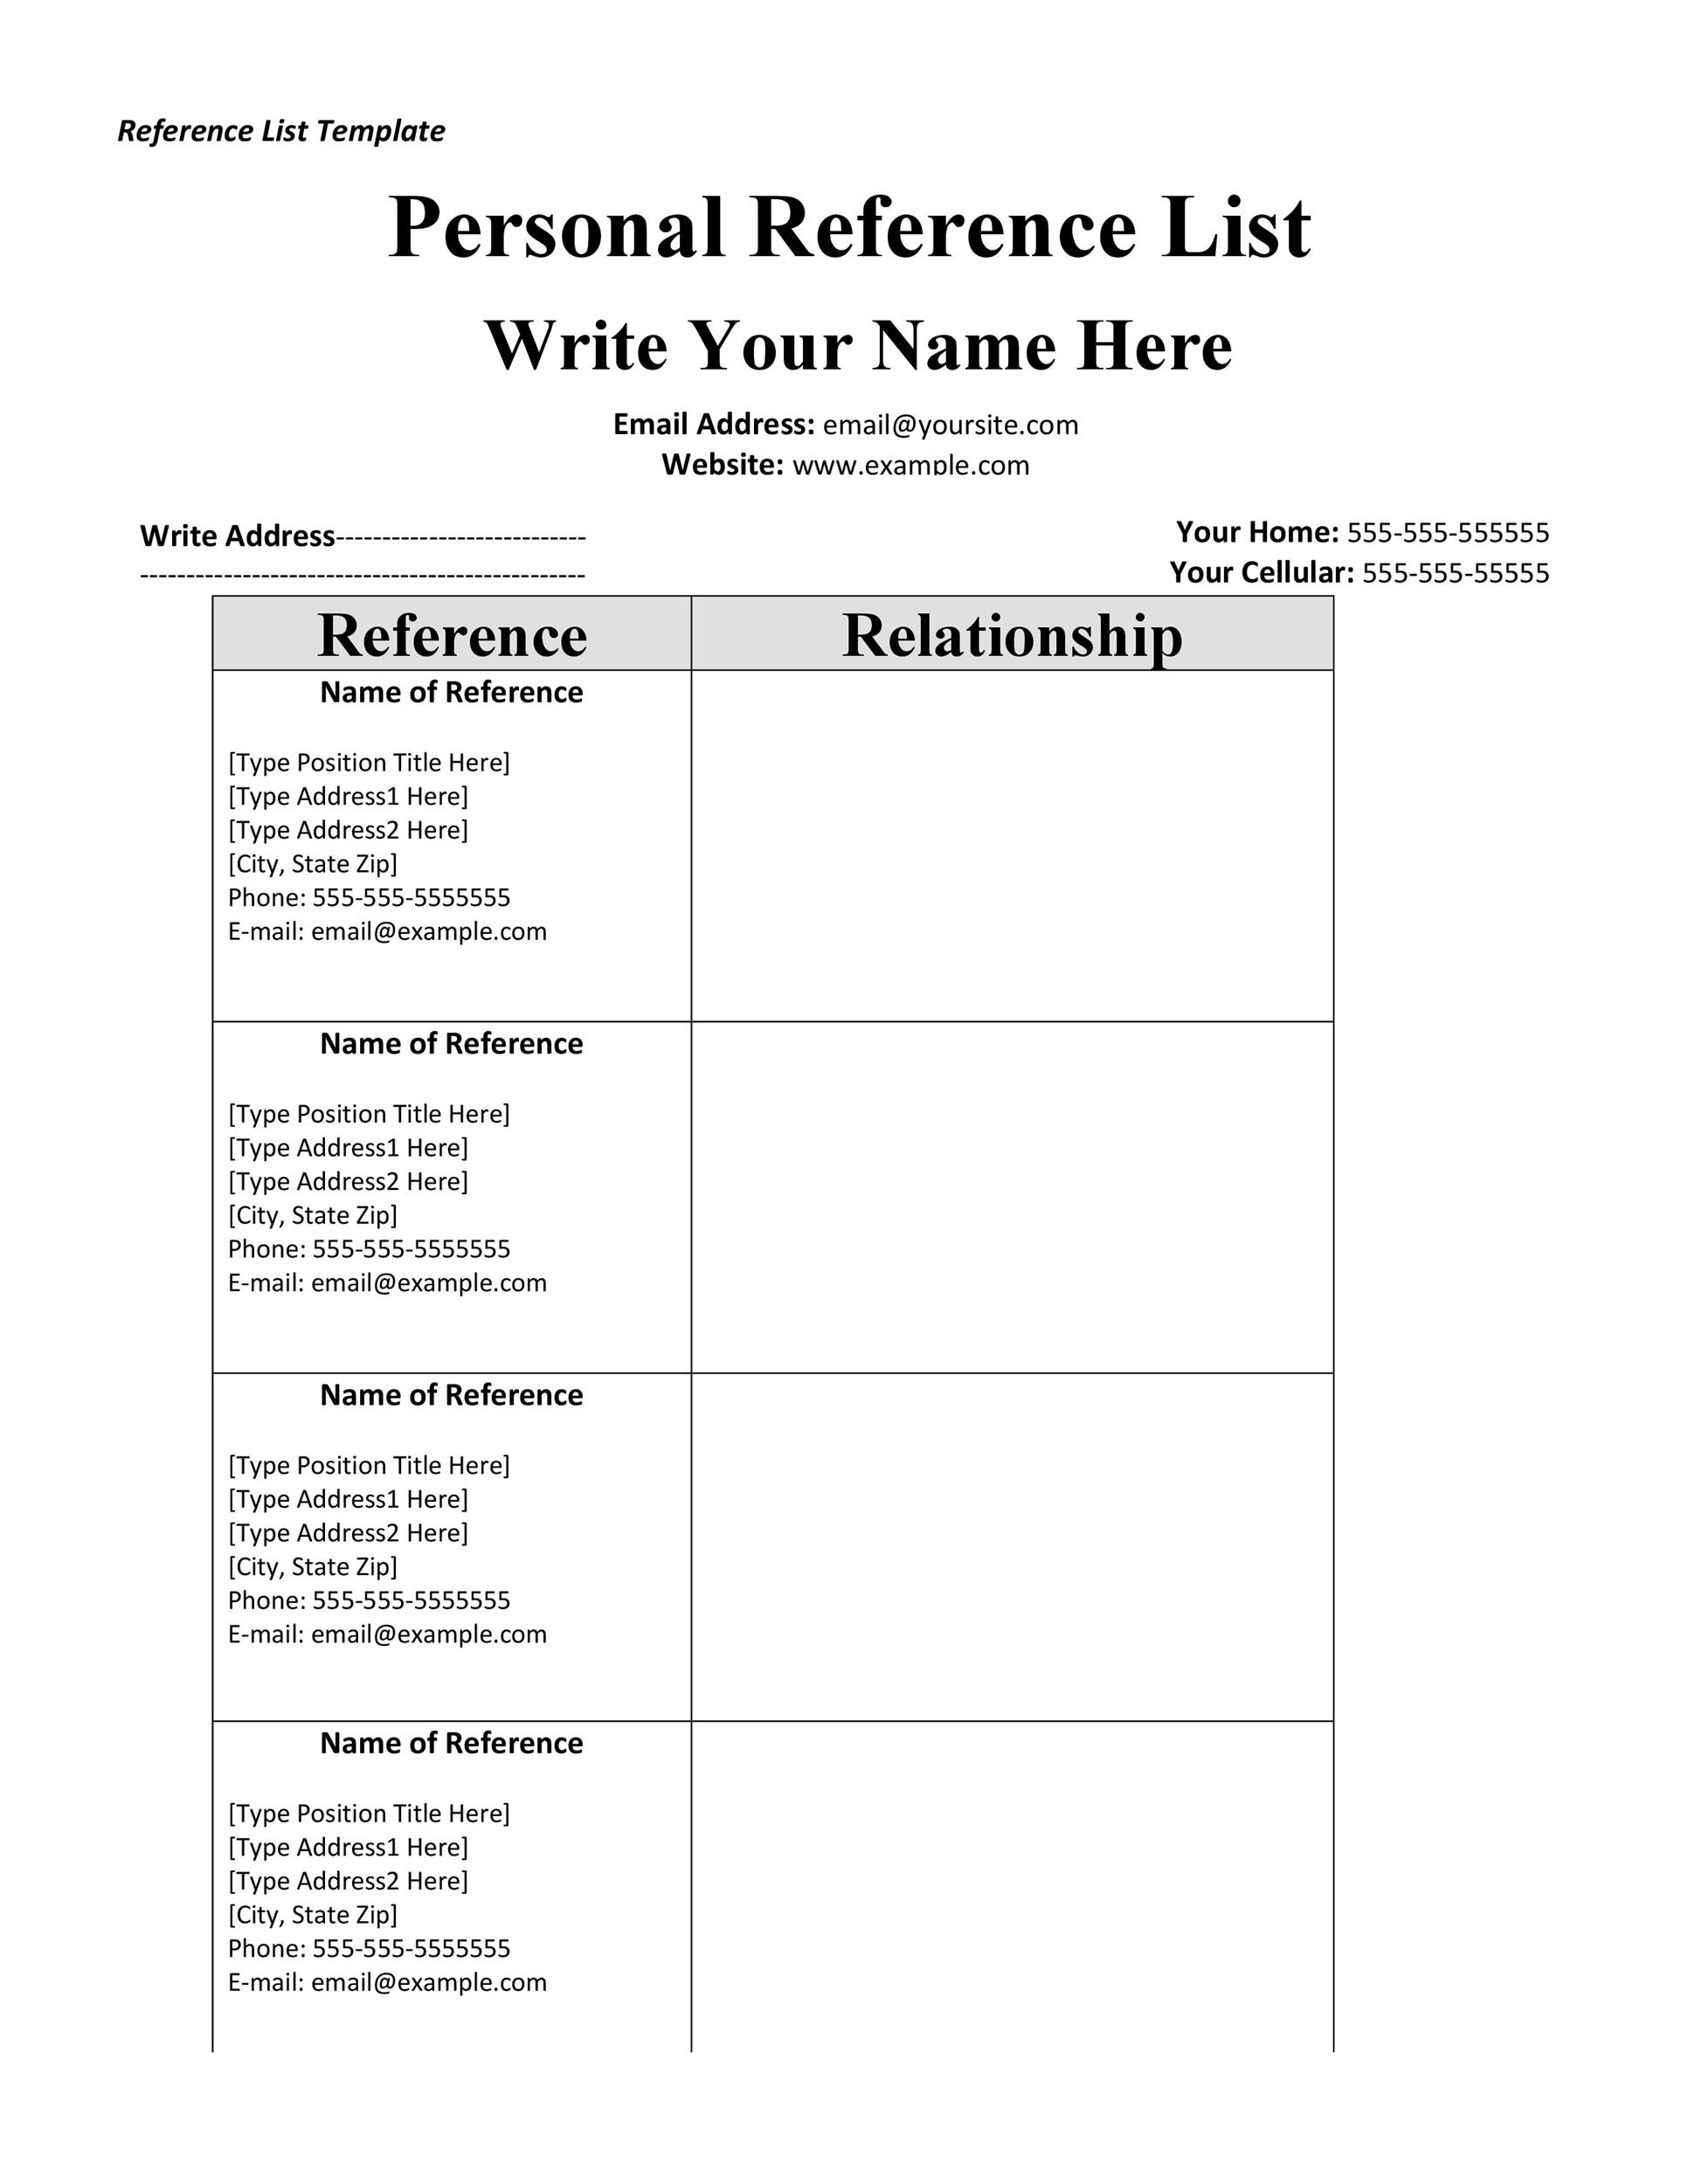 essay reference page sample